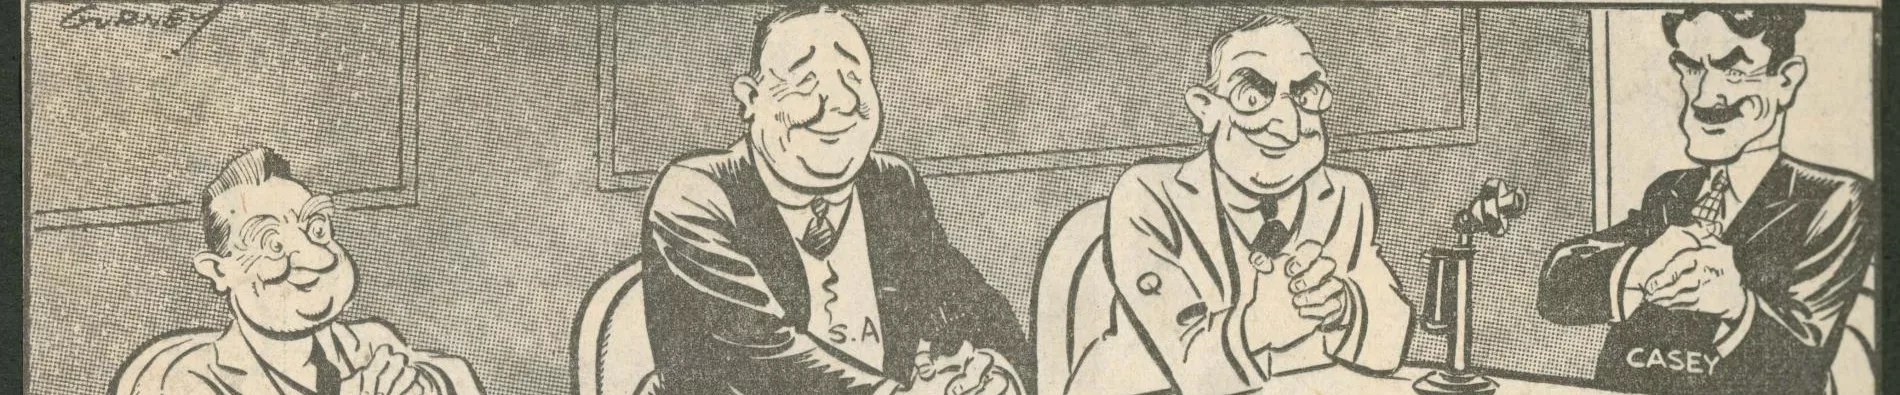 A newspaper cartoon in black and white of a group of men sitting around a table with the words Loan Council written on it and a Monopoly man character in the middle.